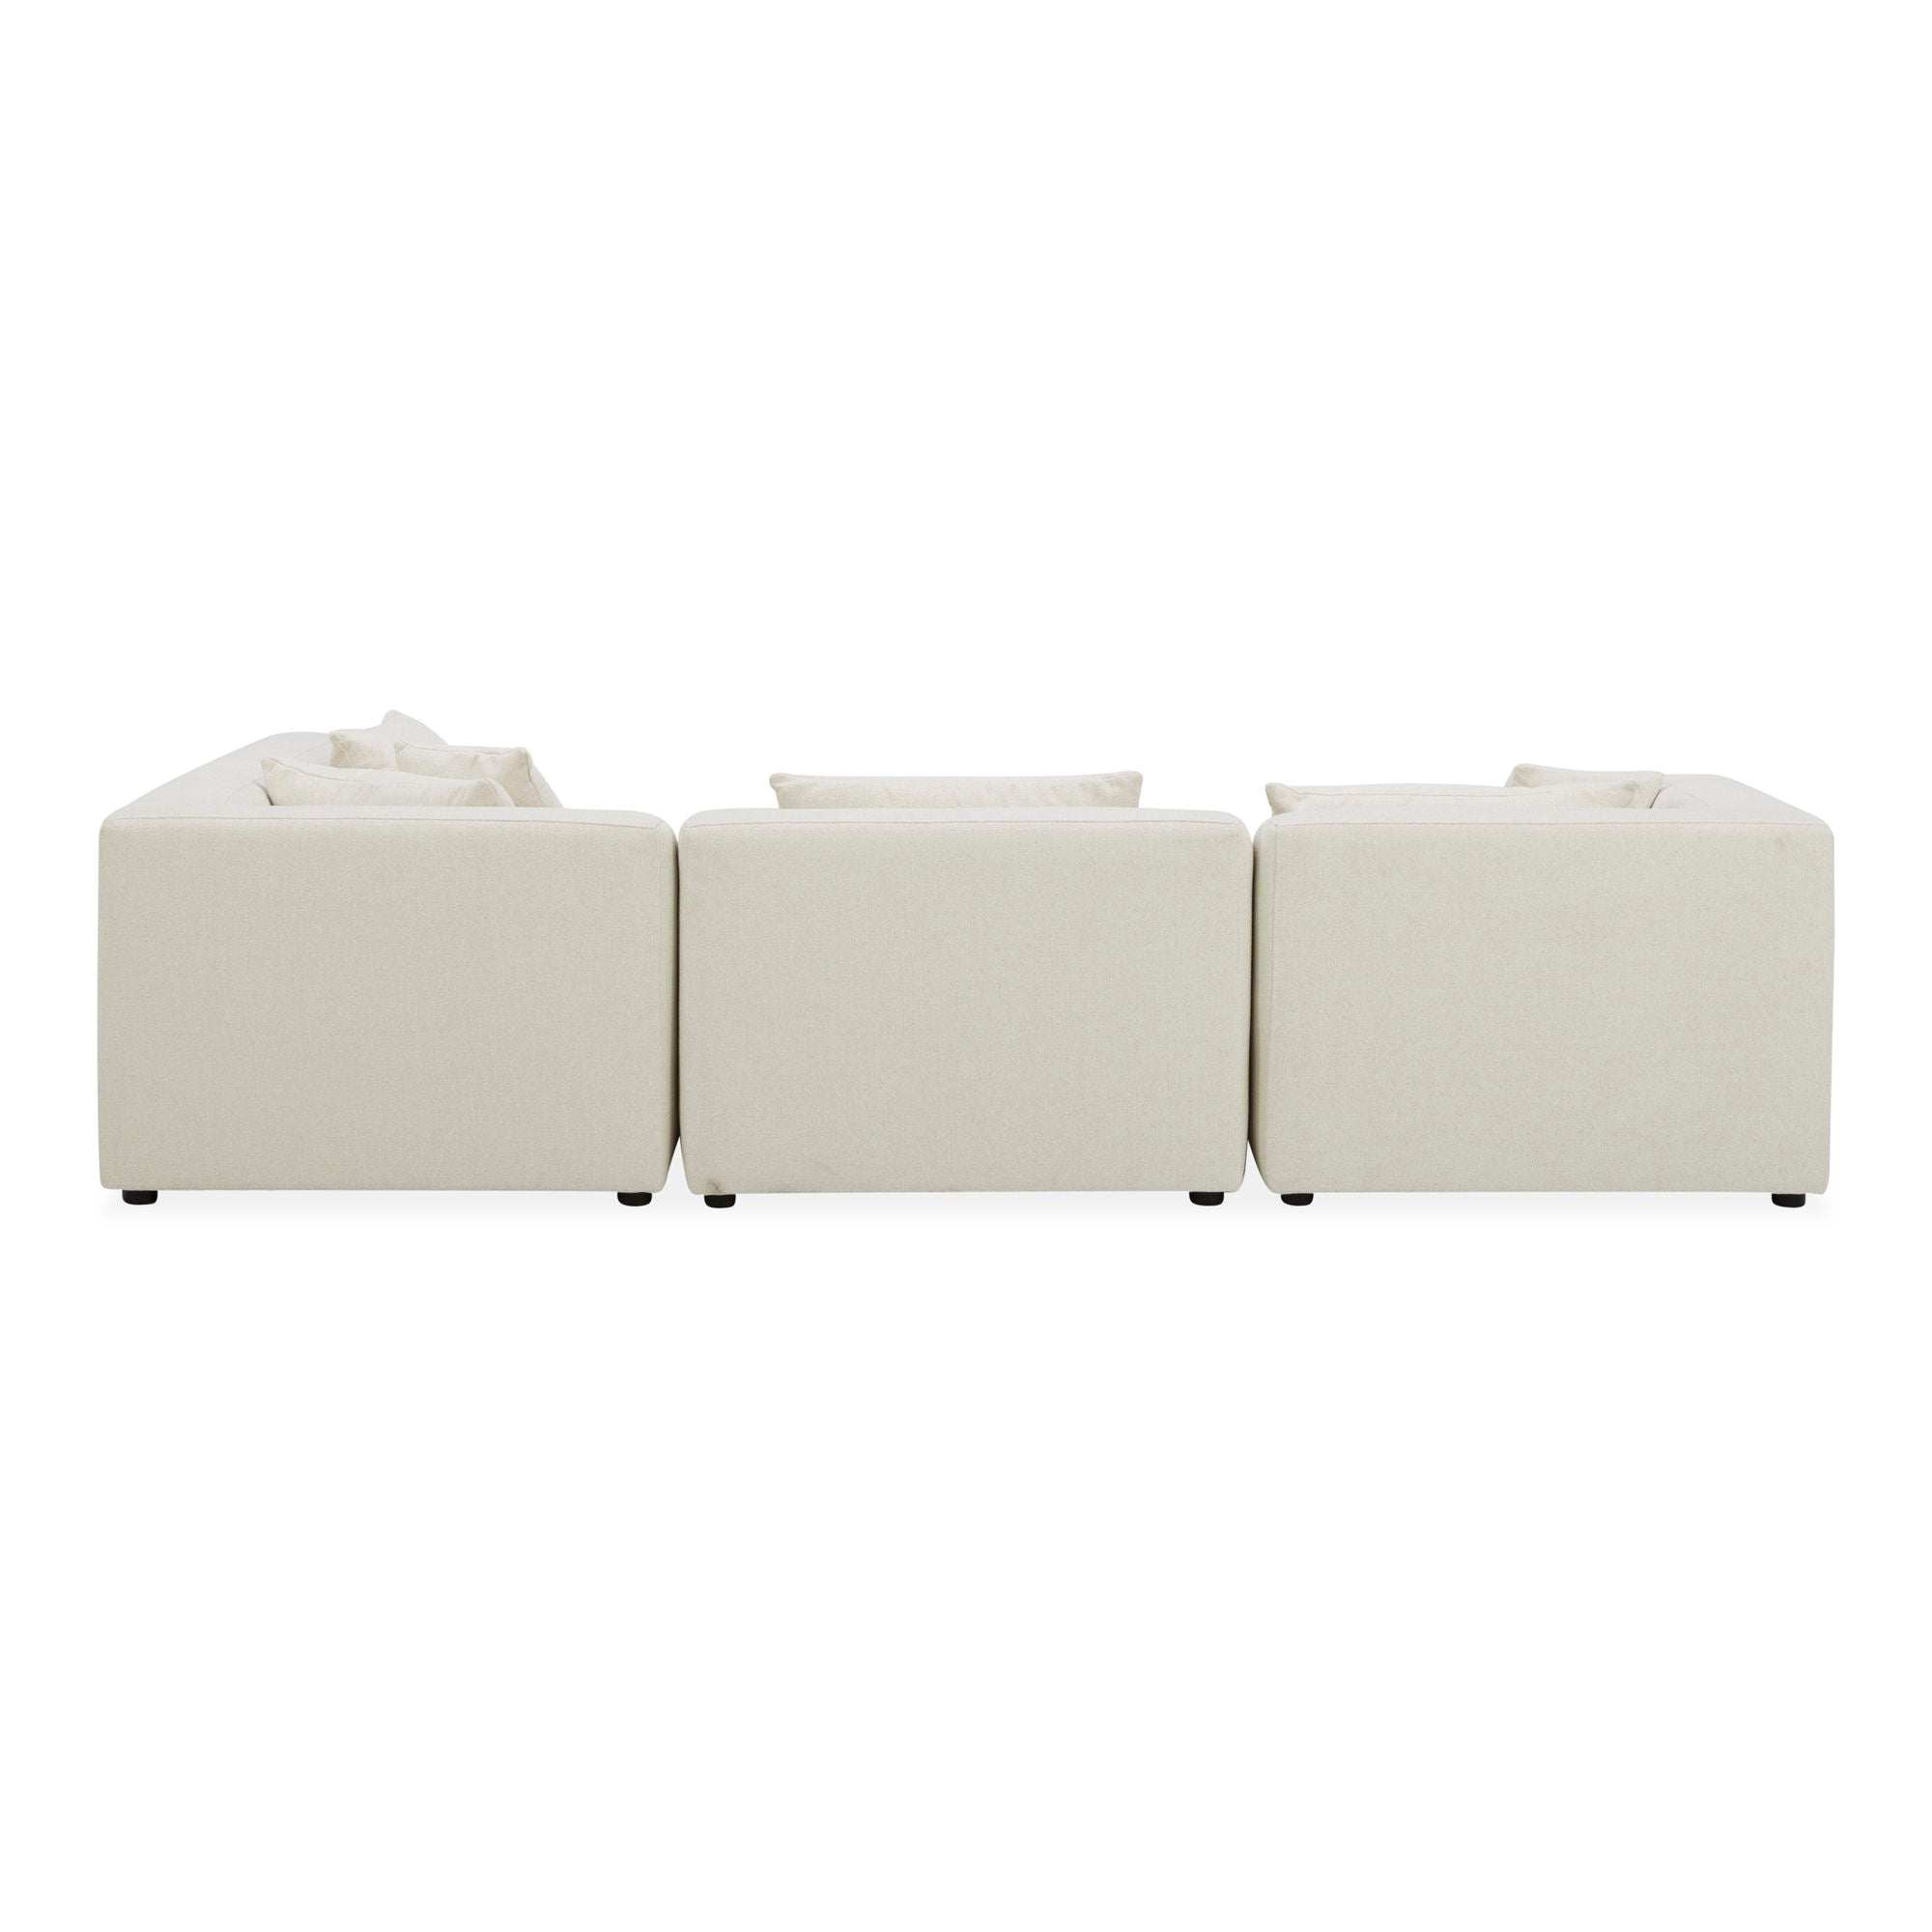 Lowtide - Alcove Modular Configuration - Warm White-Stationary Sectionals-American Furniture Outlet